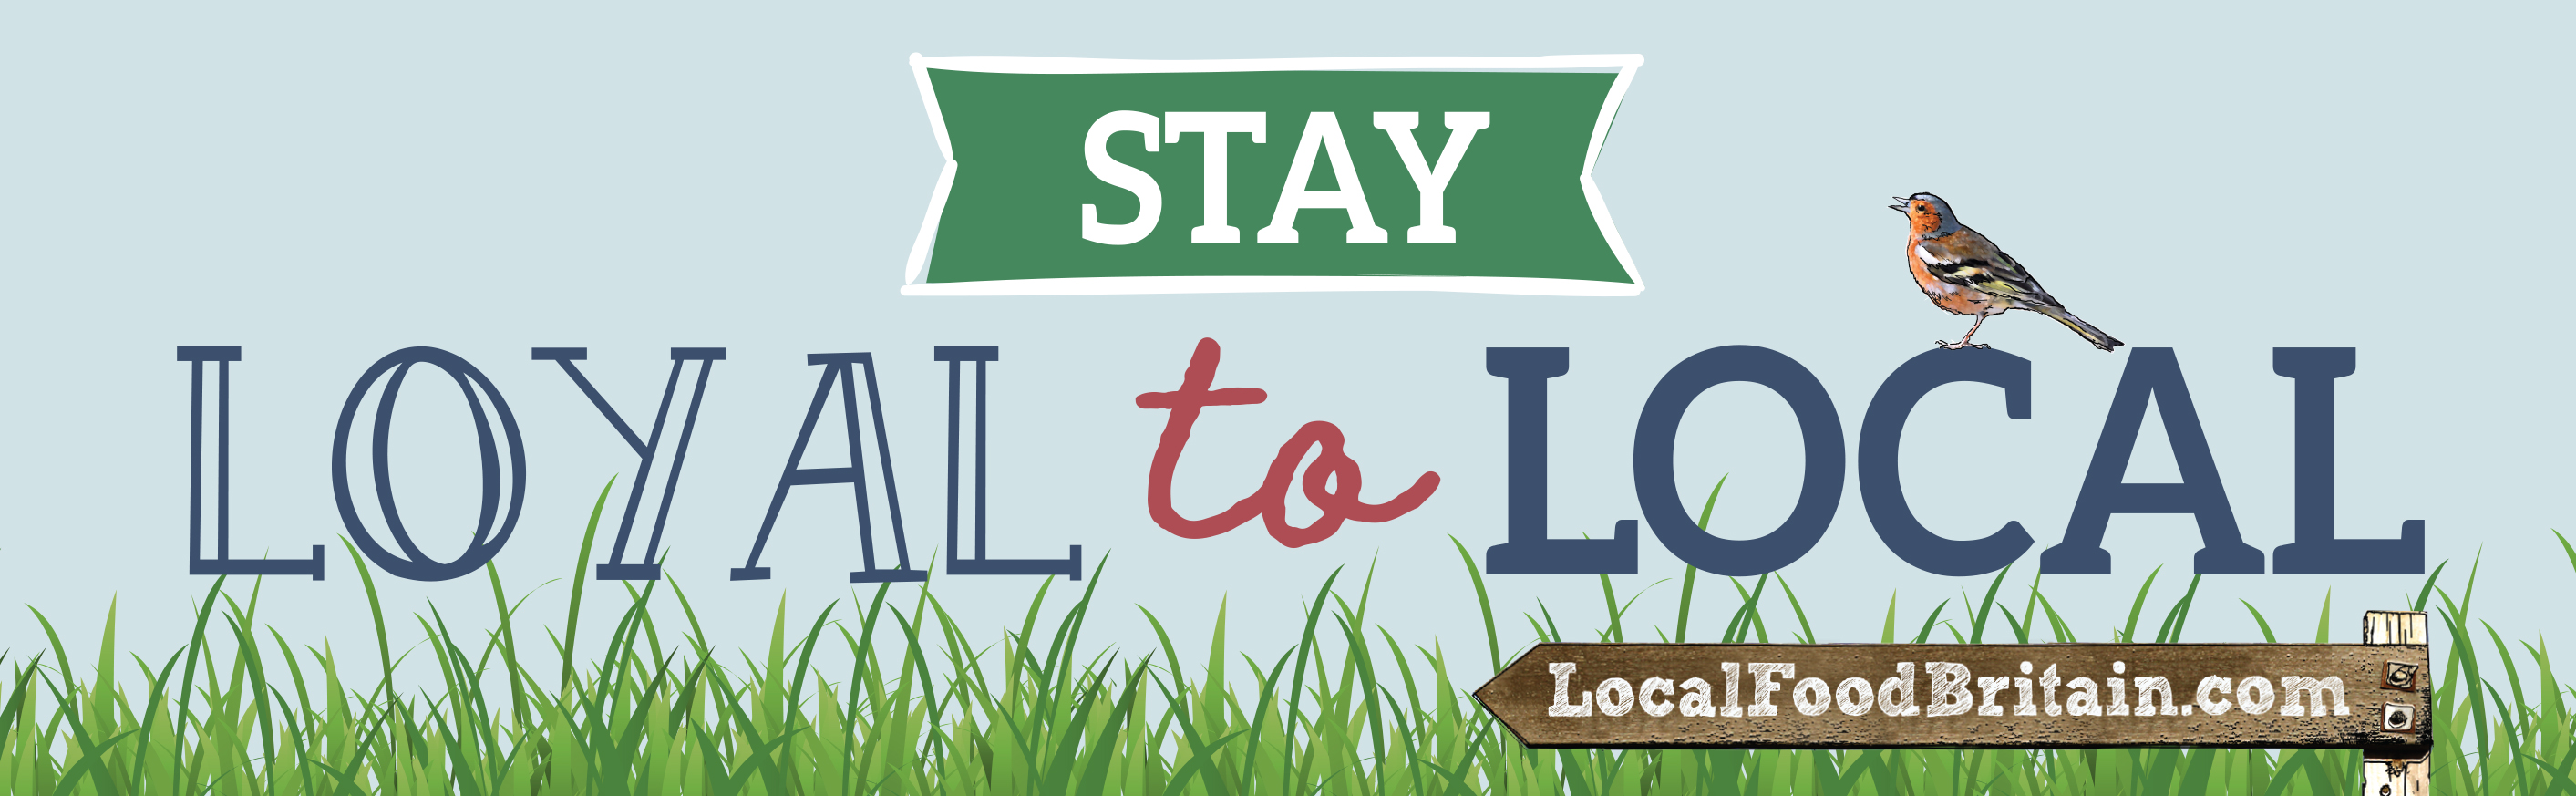 Stay Loyal to Local campaign logo